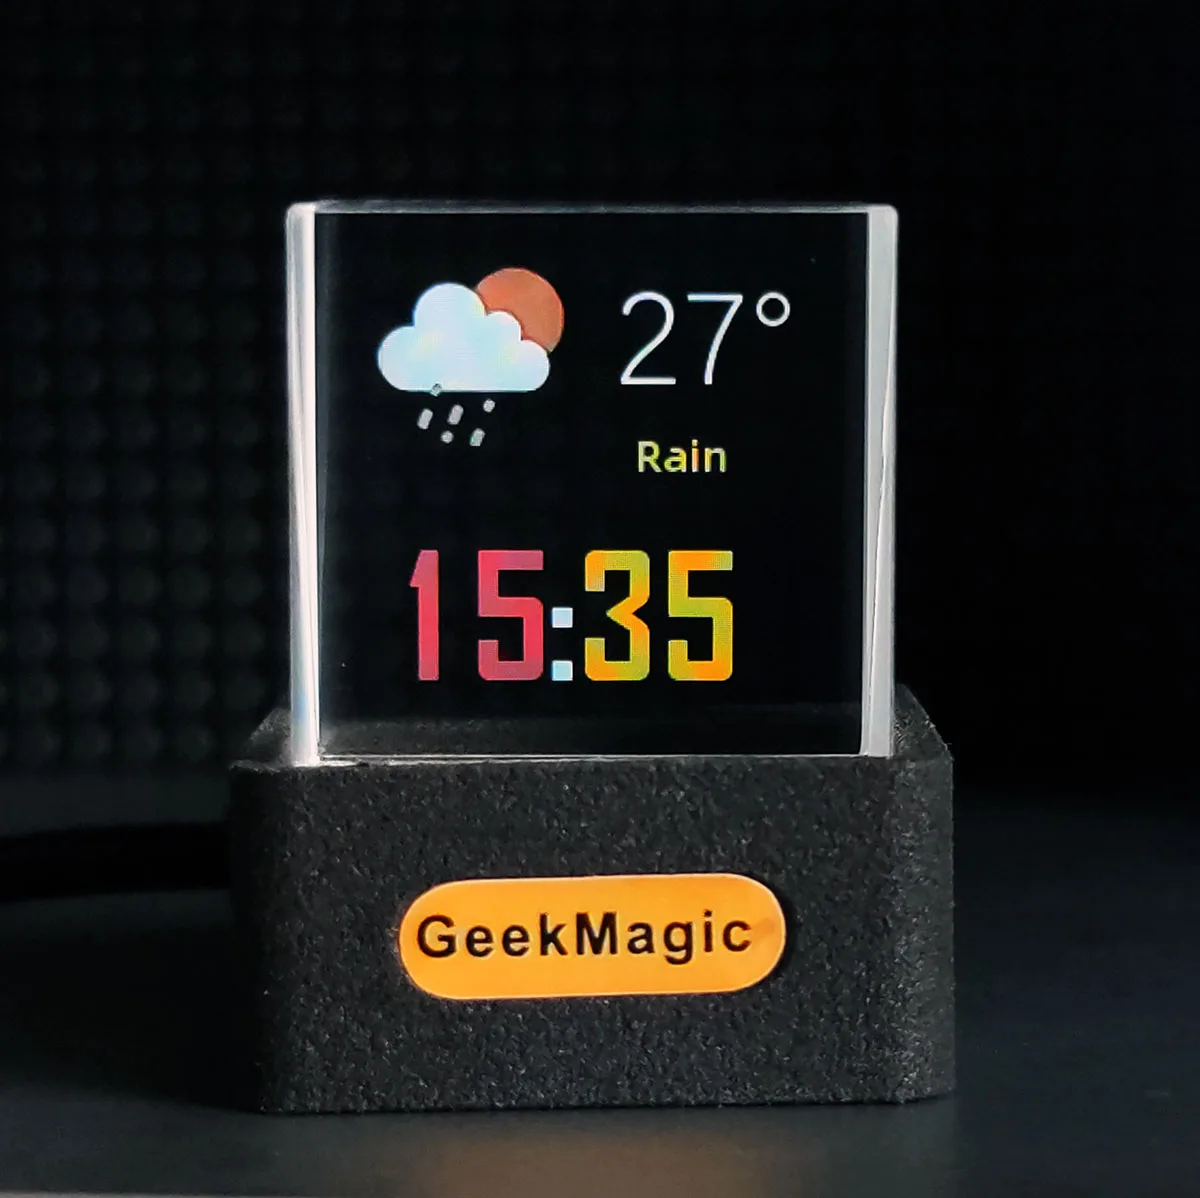 GeekMagic GIFTV Crystal Cube Photo Display Holographic Desktop Smart Weather Station Digital Clock with GIF Animations Album